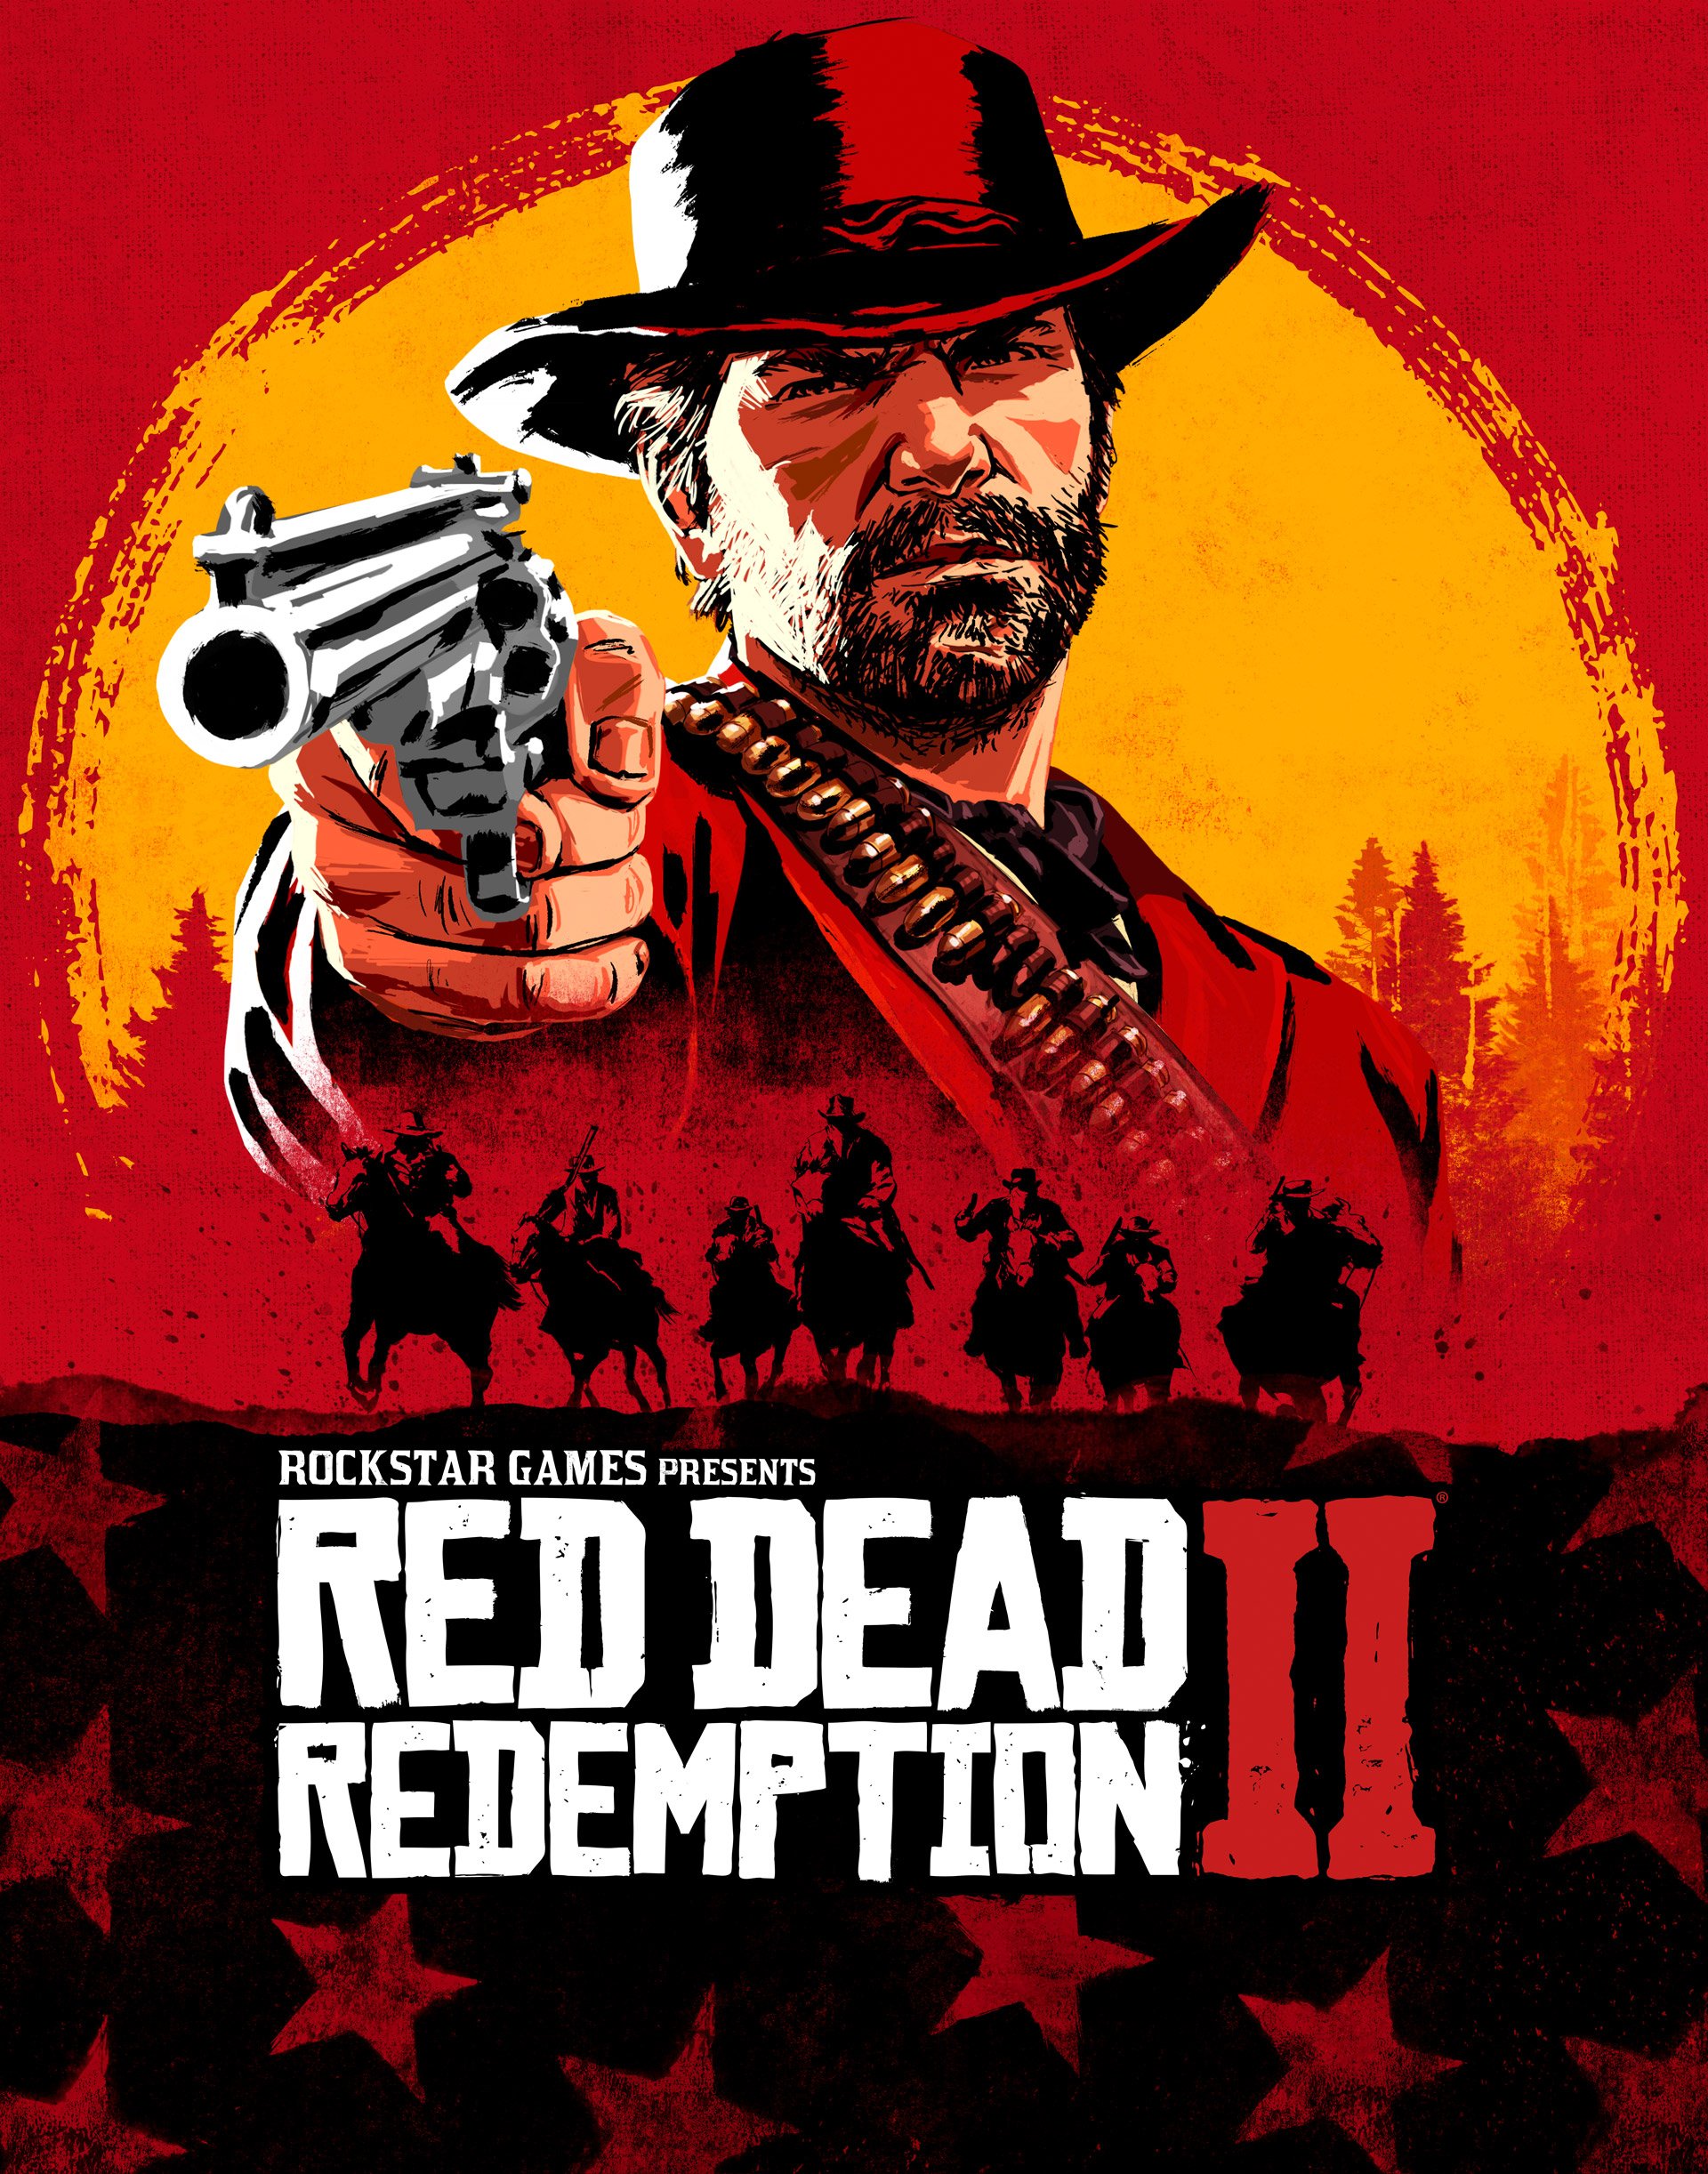 Red Dead Redemption 2: Ultimate Edition [v.1.0.1311.23] (2020) RePack от R.G. Механики (2019)